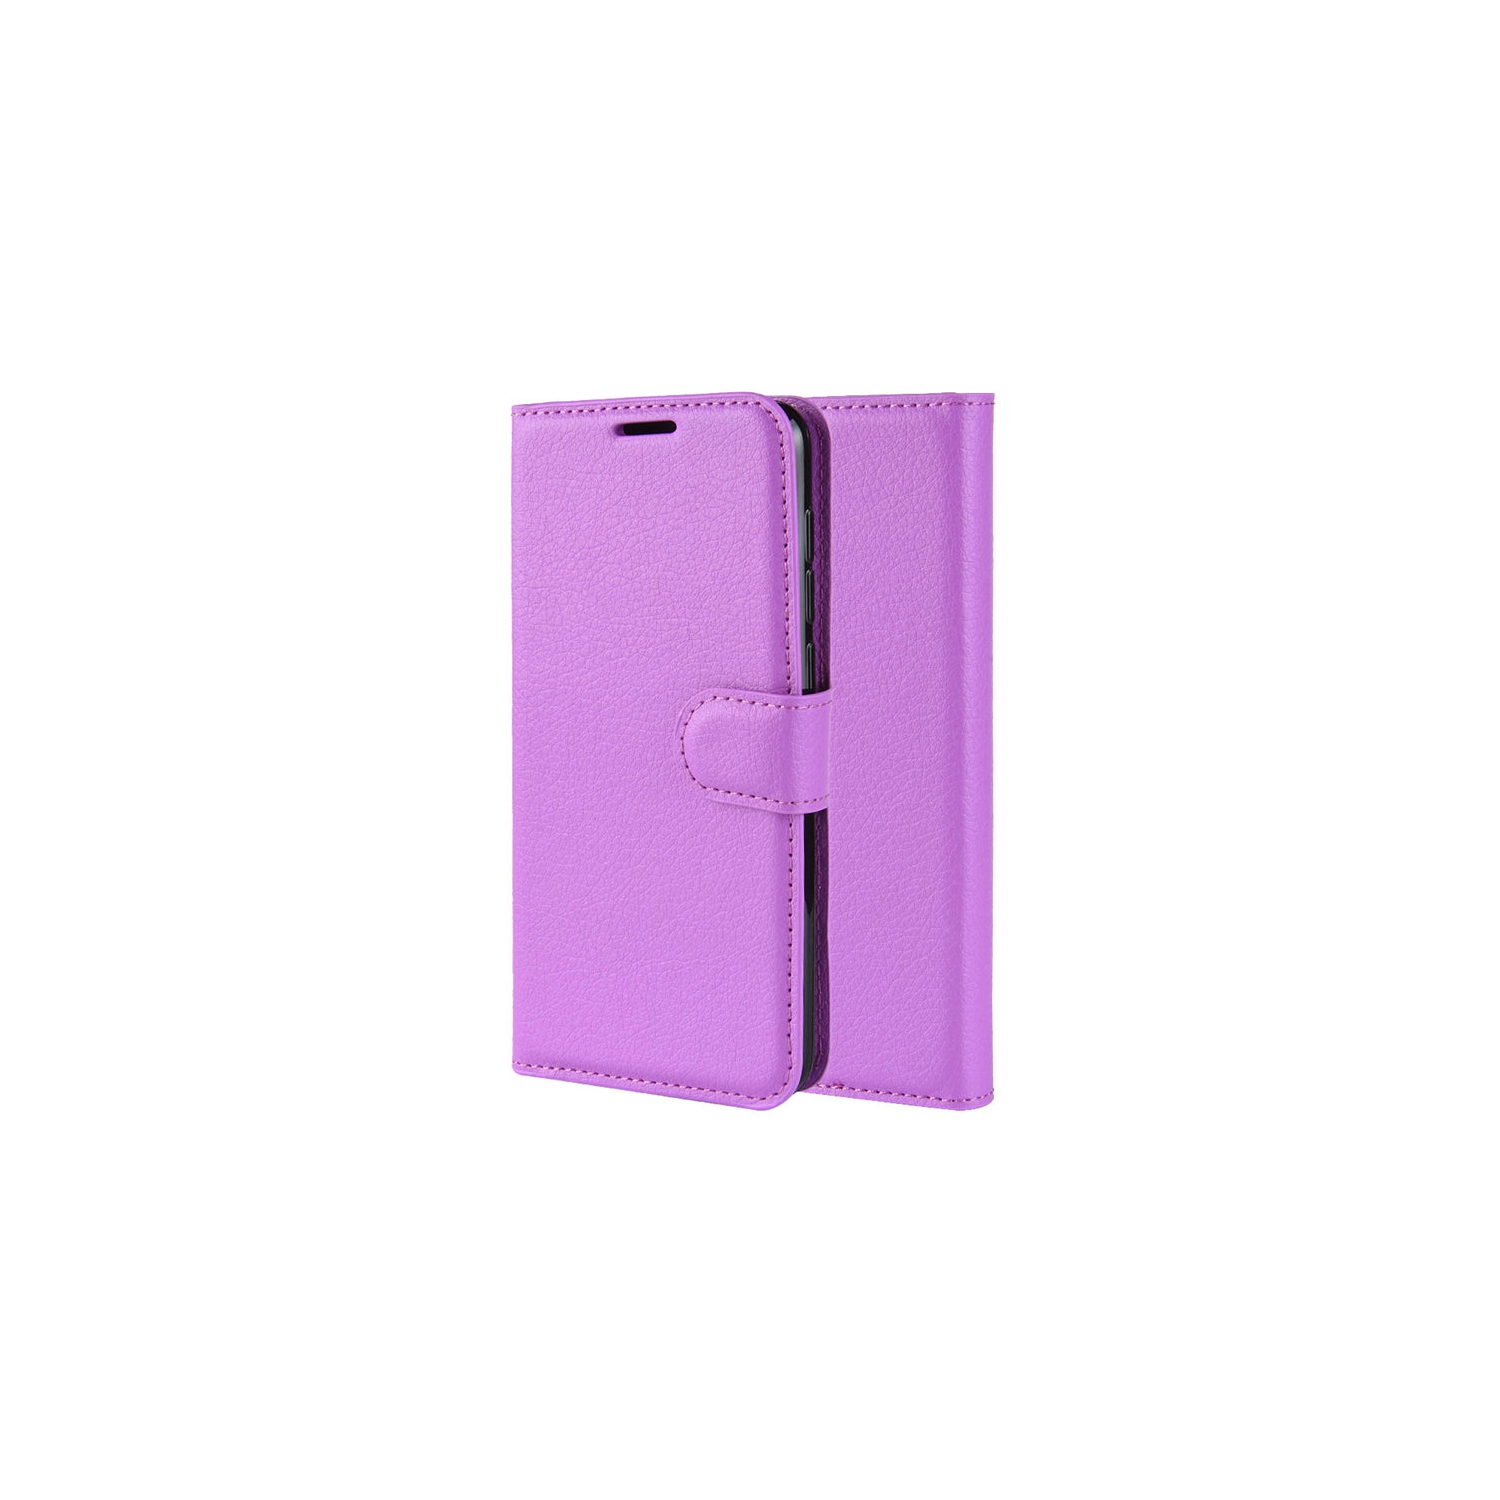 PANDACO Purple Leather Wallet Case for iPhone 13 Mini